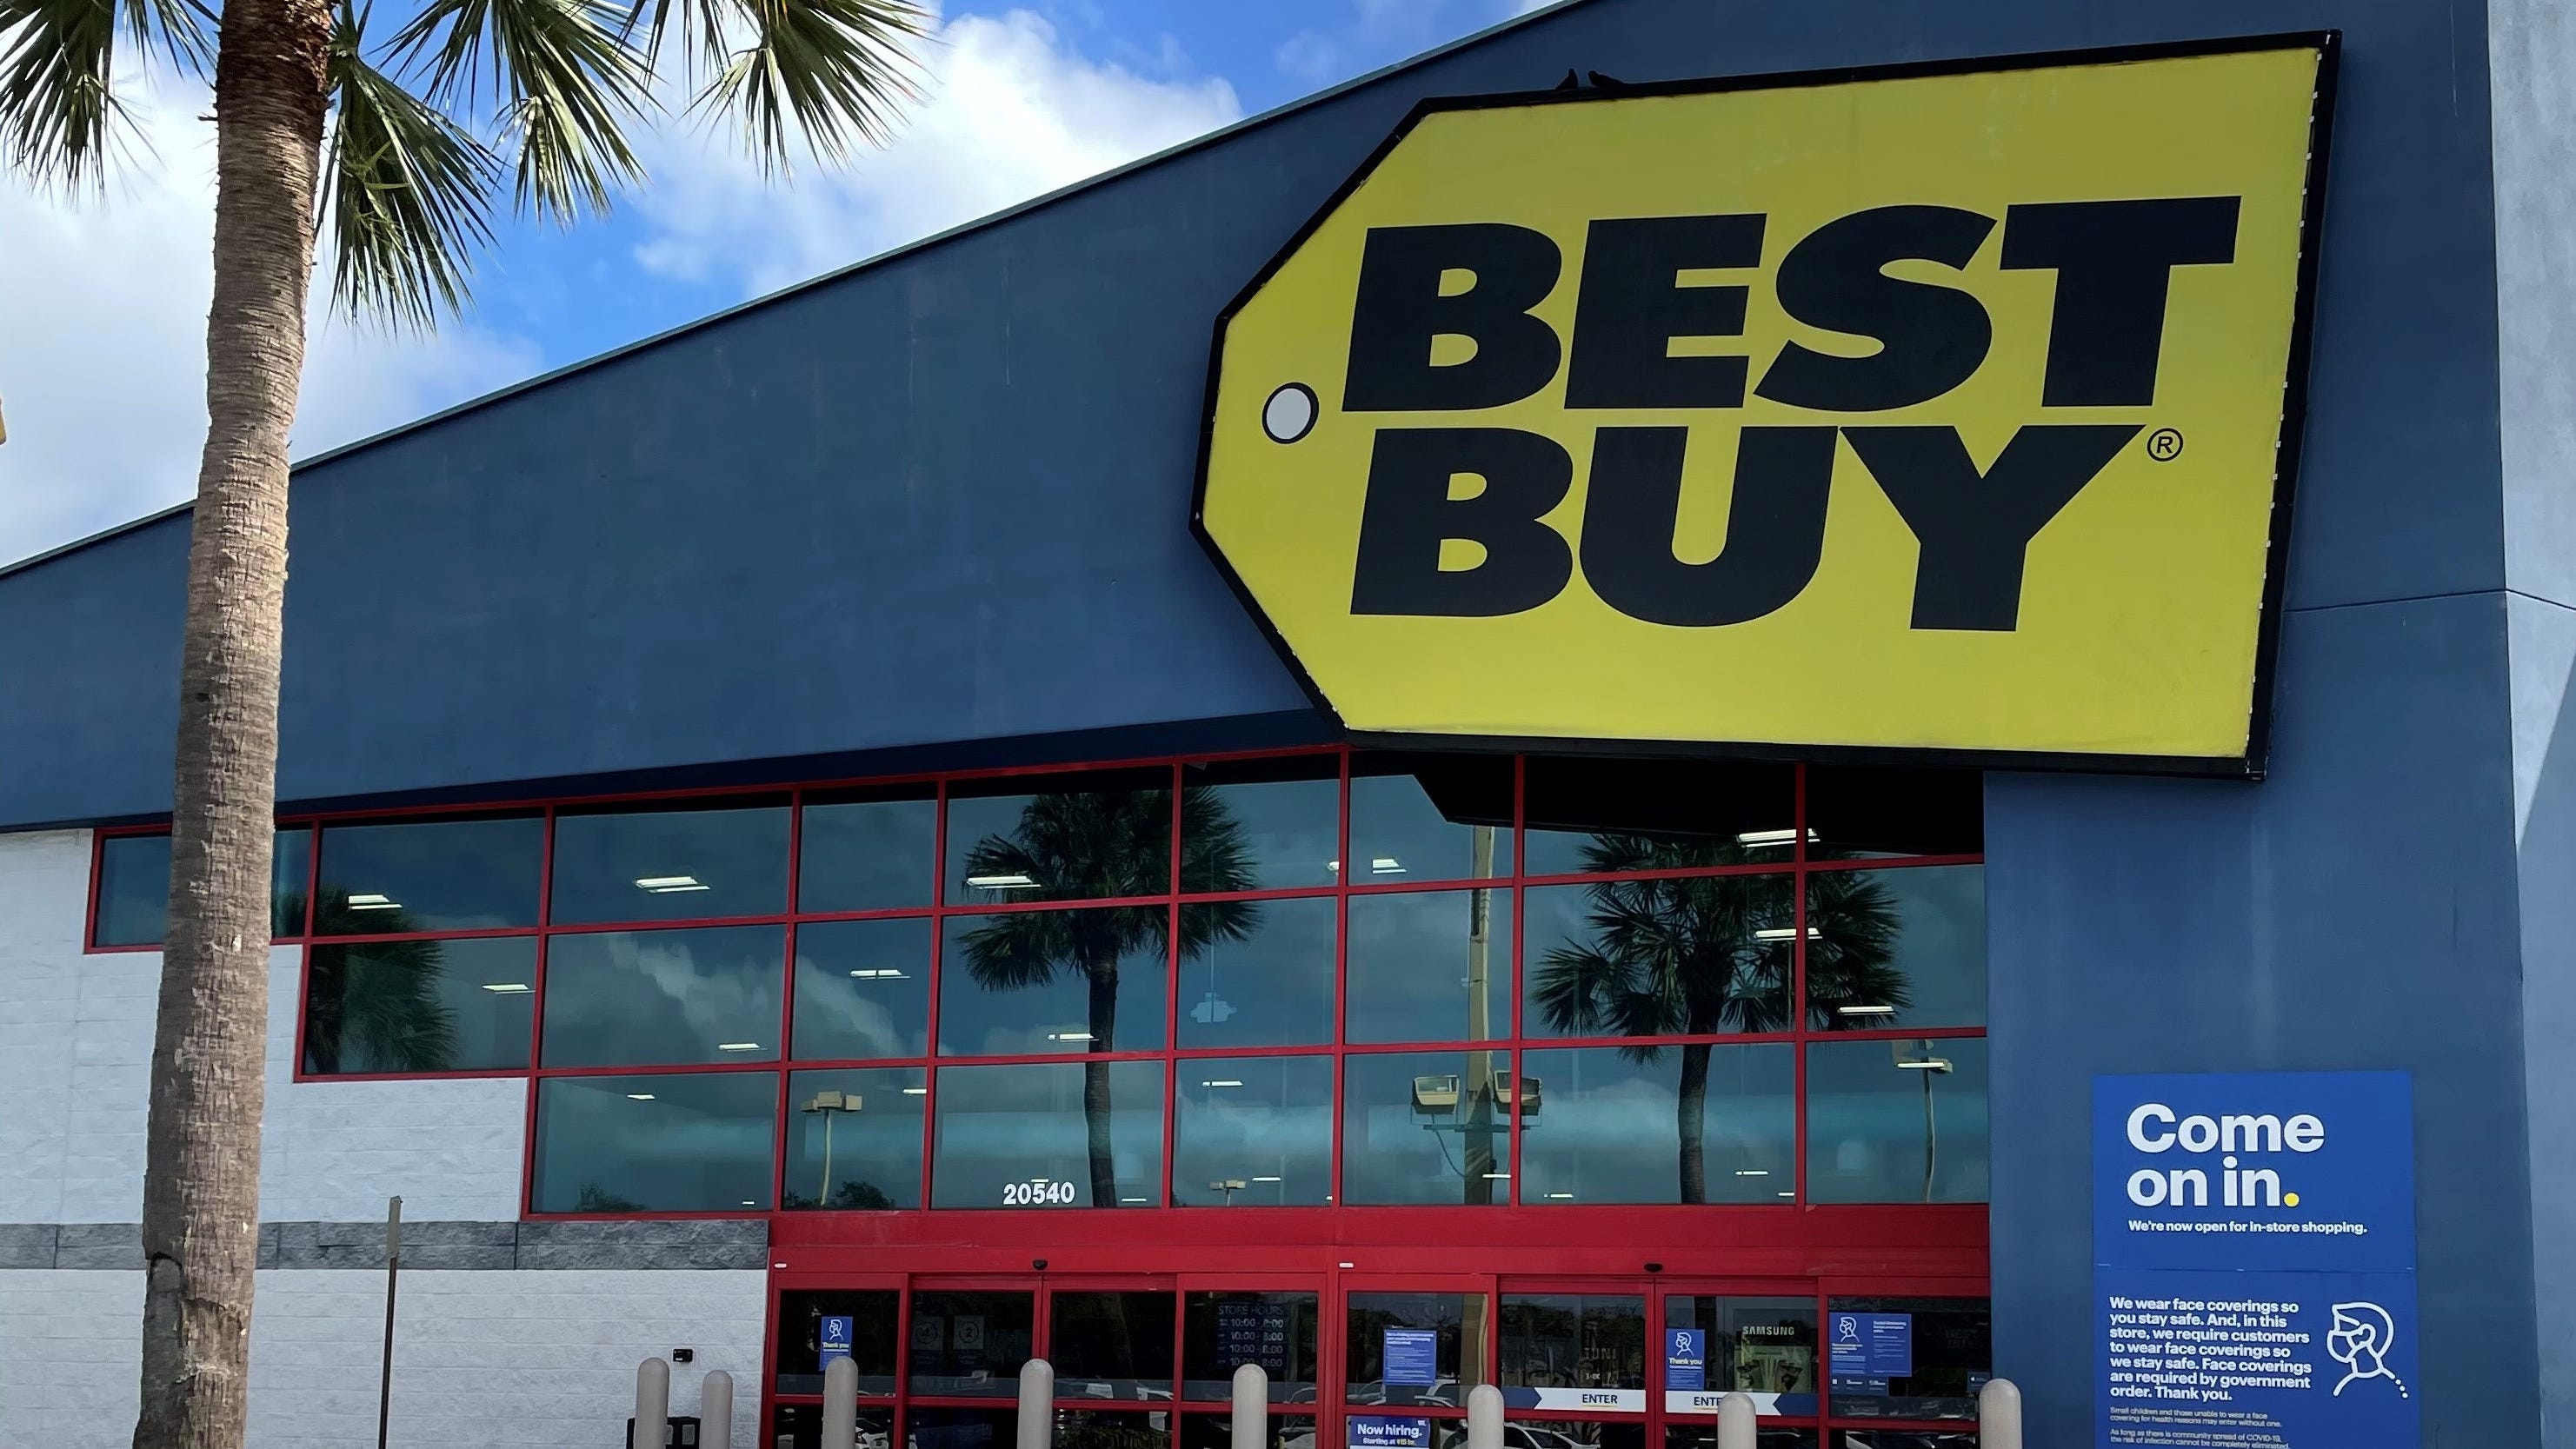 Best Buy Black Friday deals 2021 Early sale Oct. 1922, new guarantee